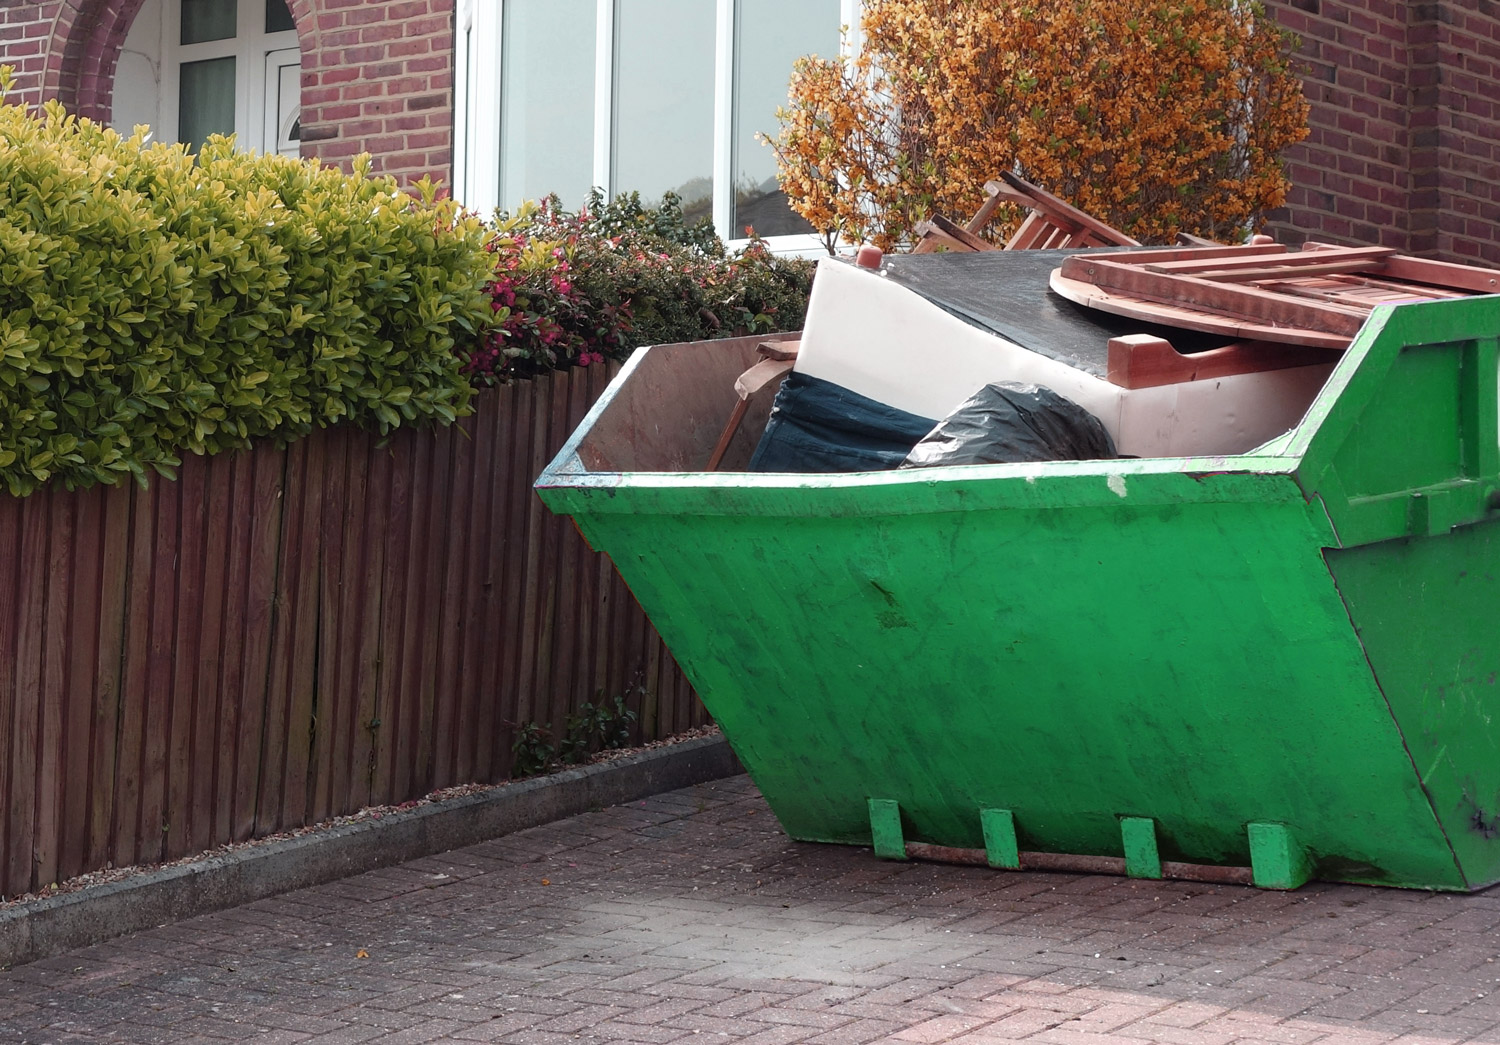 5 Common Mistakes to Avoid When Choosing a Skip Hire Service